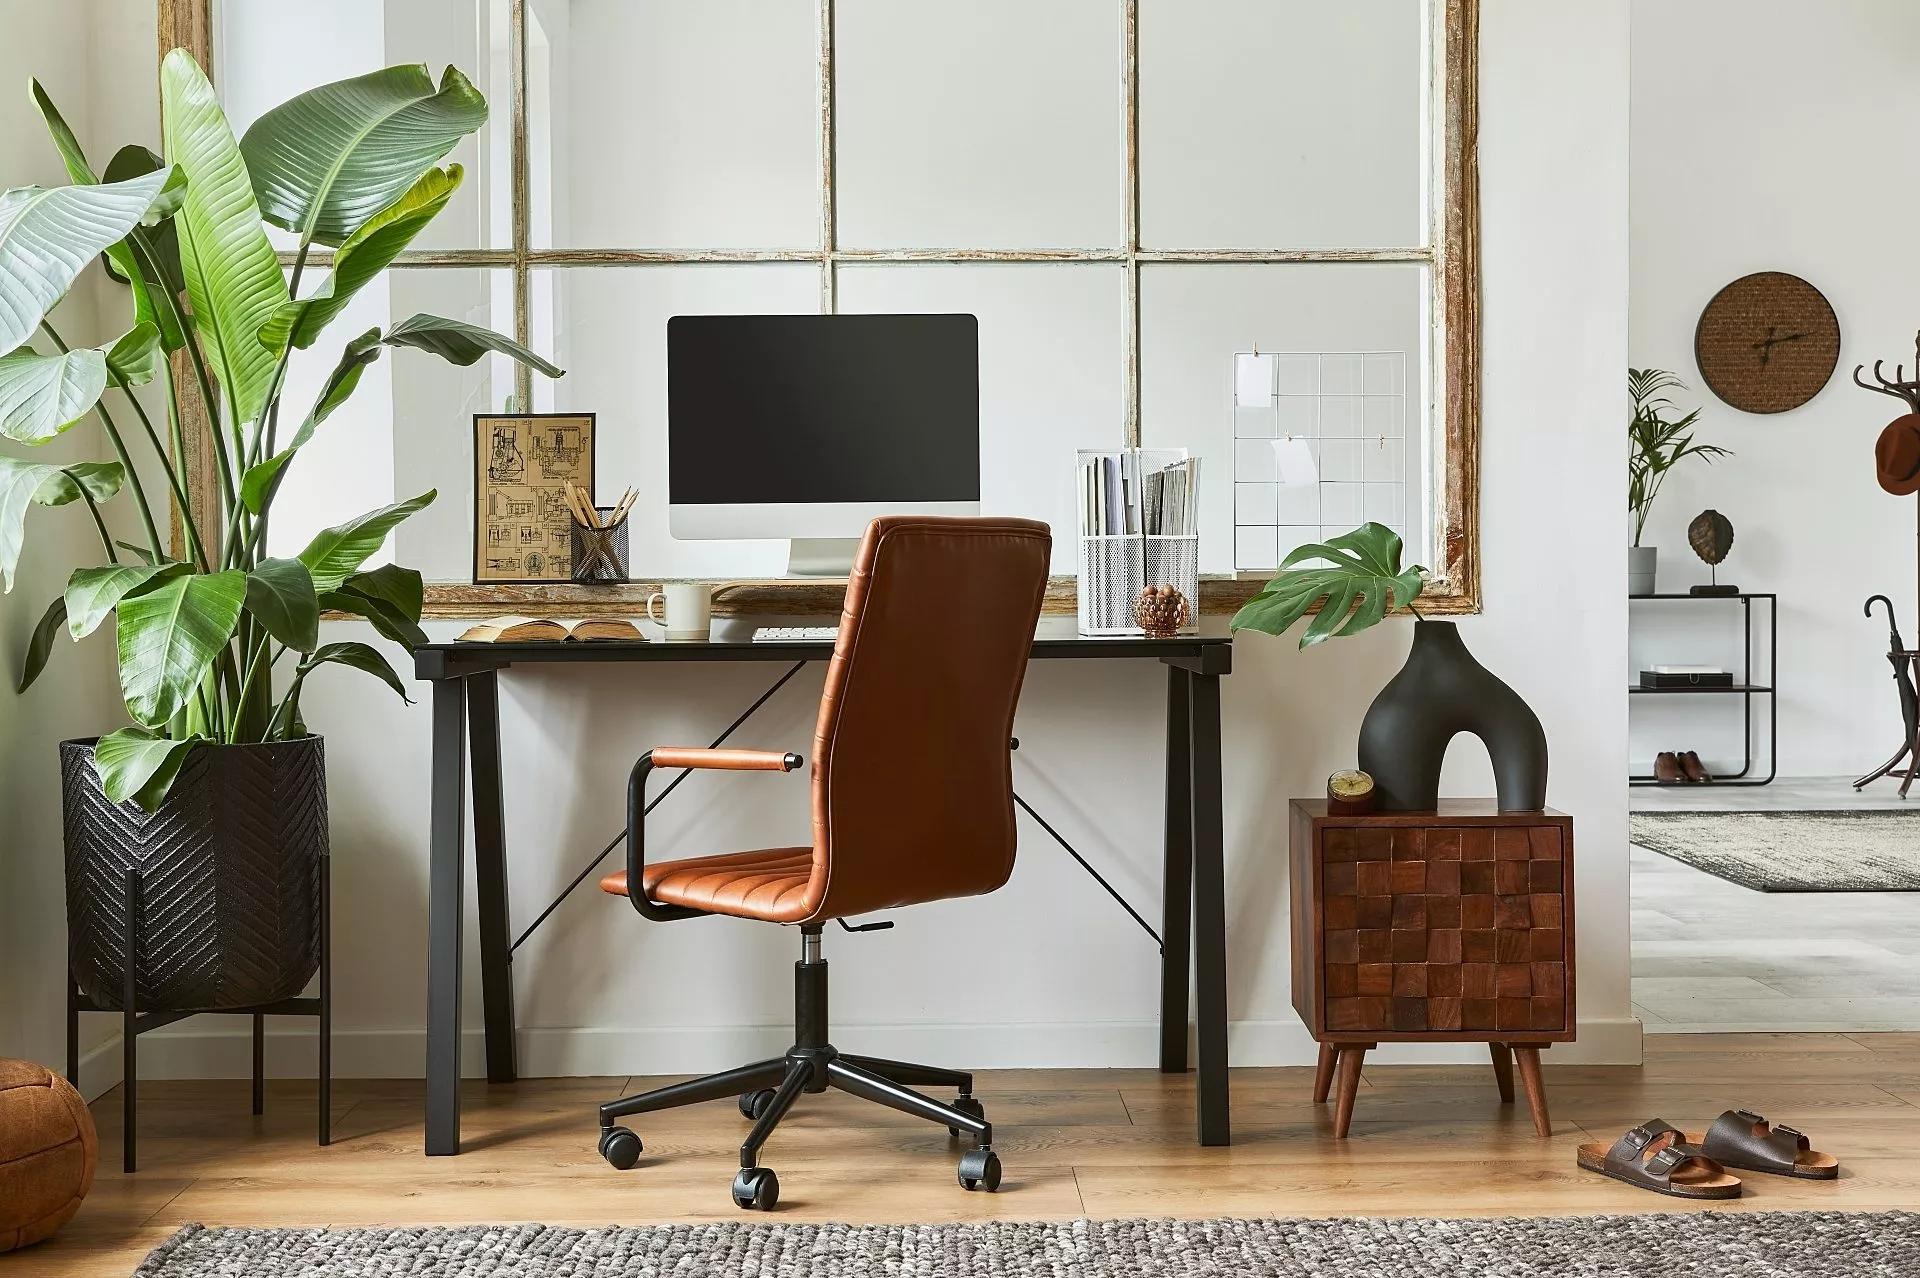 Well-lit modern workspace at home with desk, chair, white walls, and greenery.